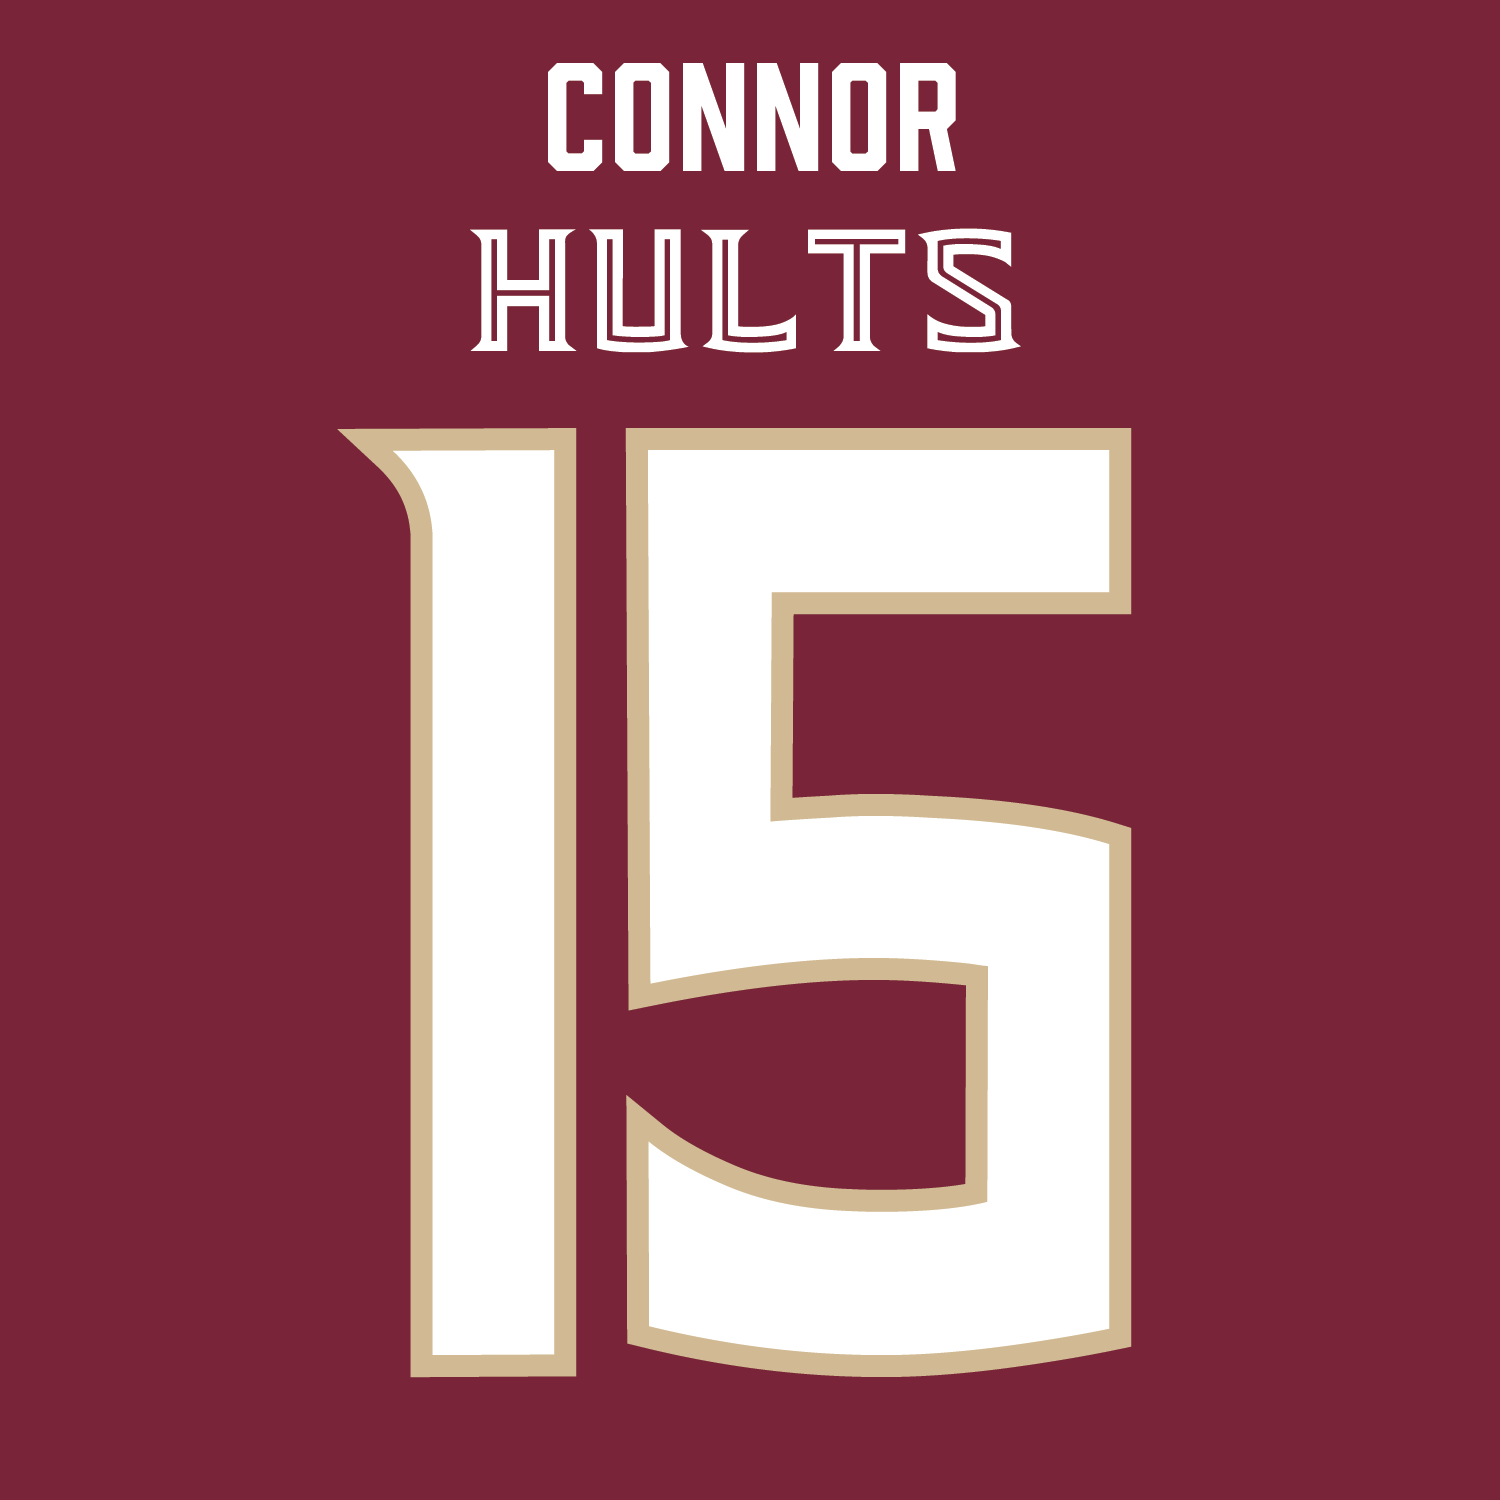 Connor Hults | #15